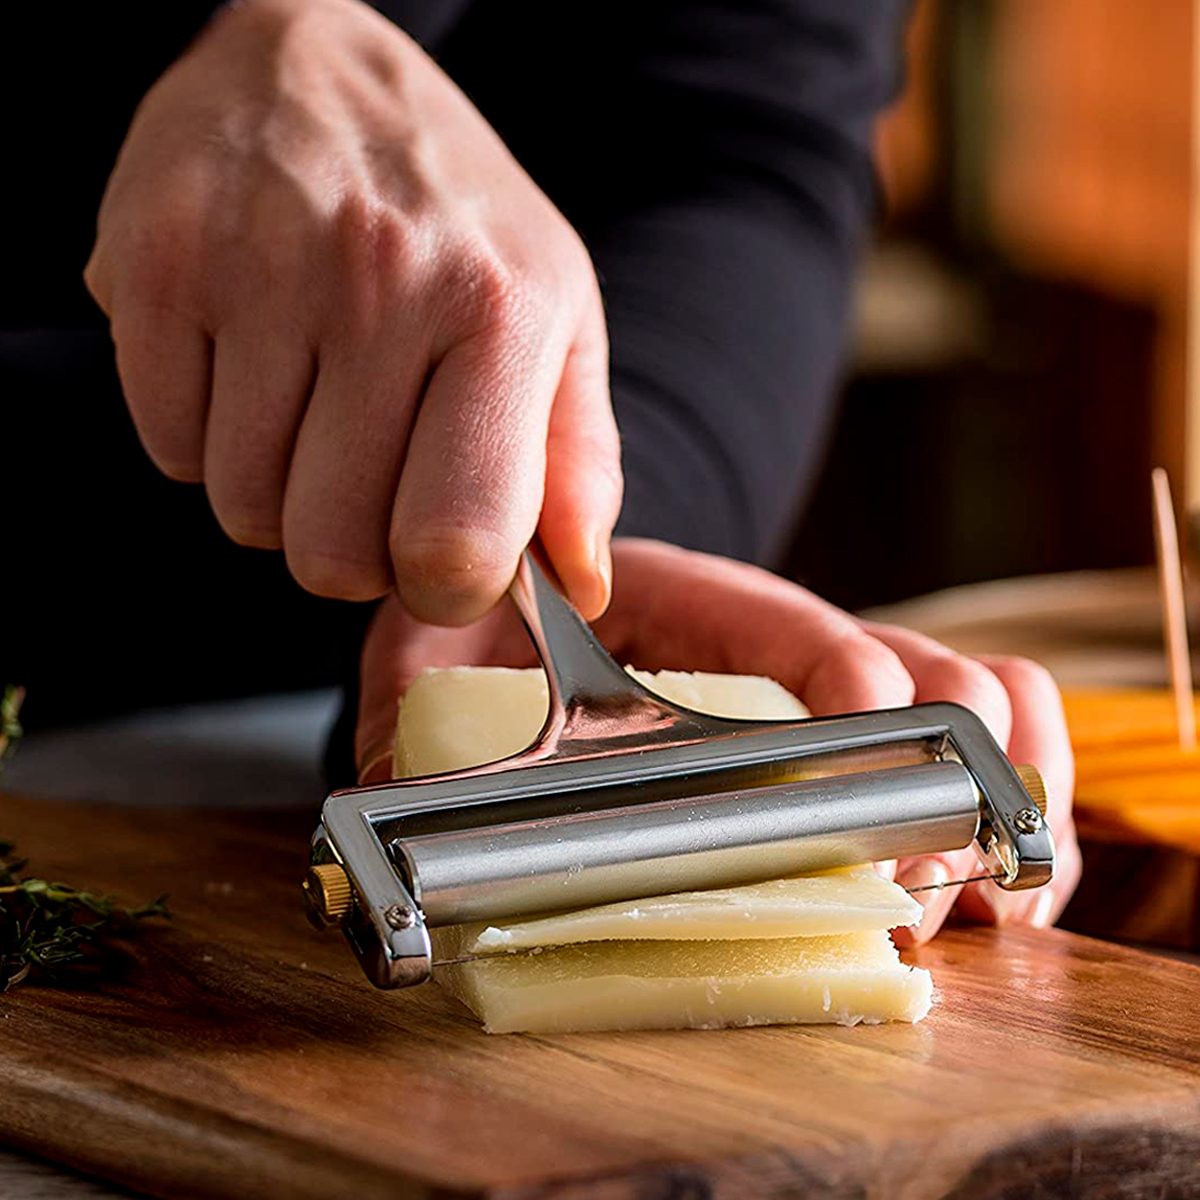 https://www.tasteofhome.com/wp-content/uploads/2020/09/Bellemain-Stainless-Steel-Wire-Cheese-Slicer-ecomm-amazon.com_.jpg?fit=700%2C700